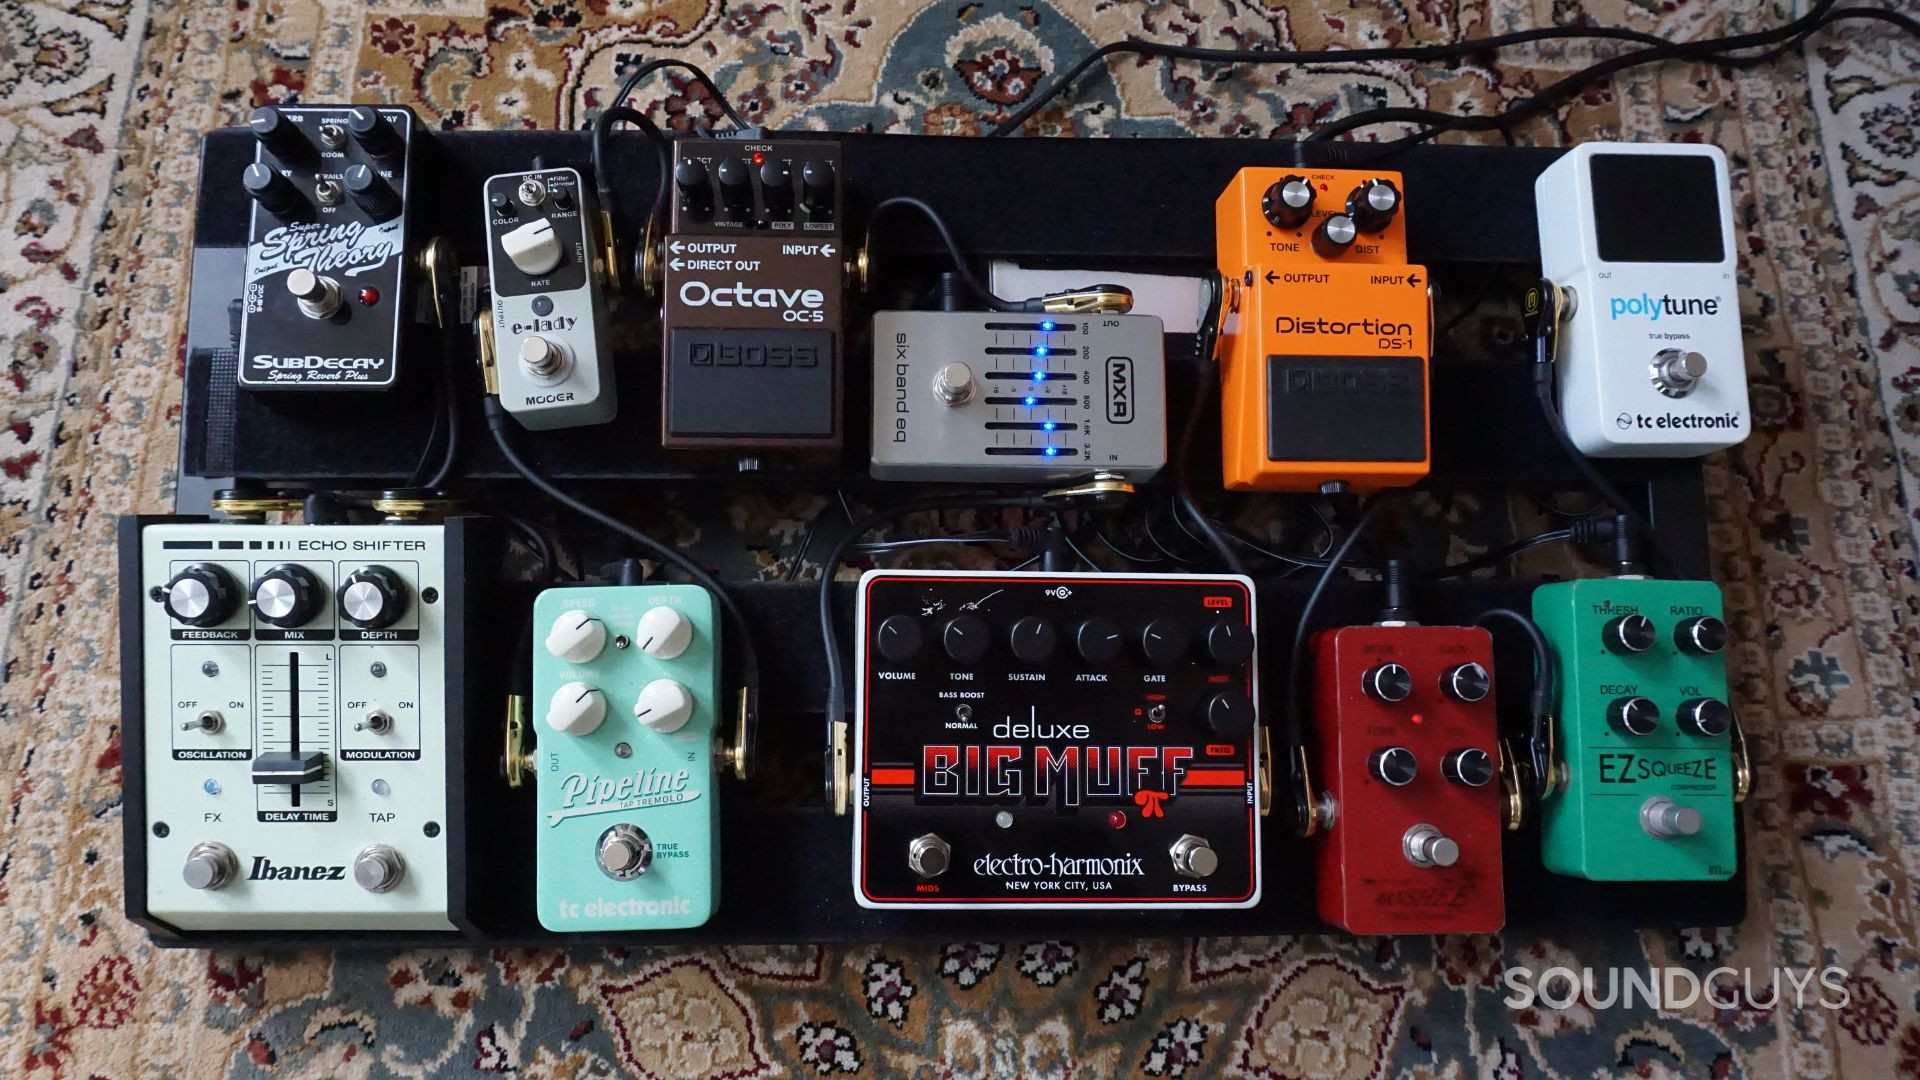 The BOSS DS-1 stands out on a pedalboard thanks to its metallic orange color